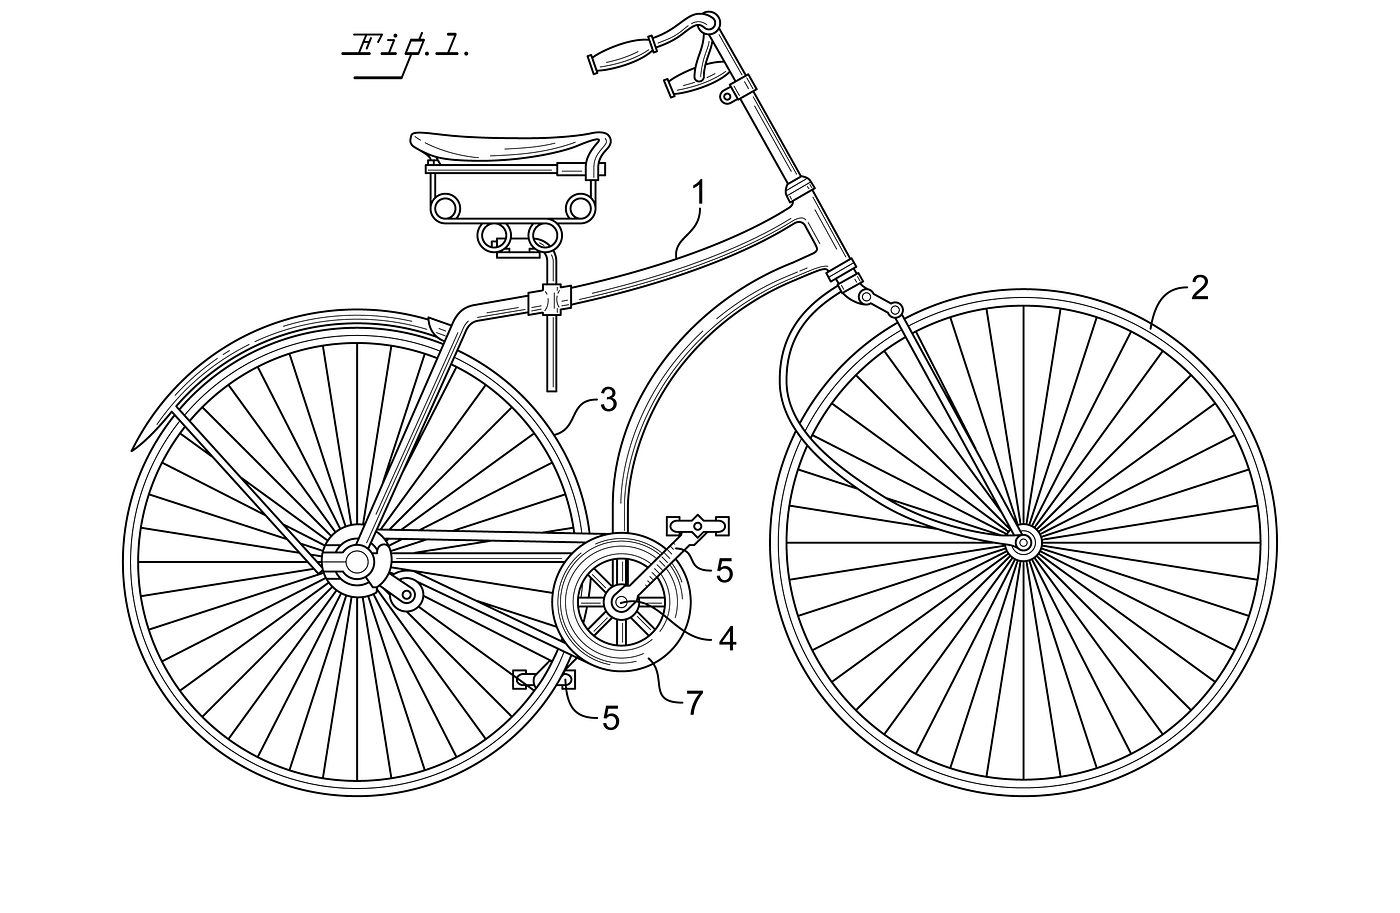 Patent Illustration: Techniques and its Importance